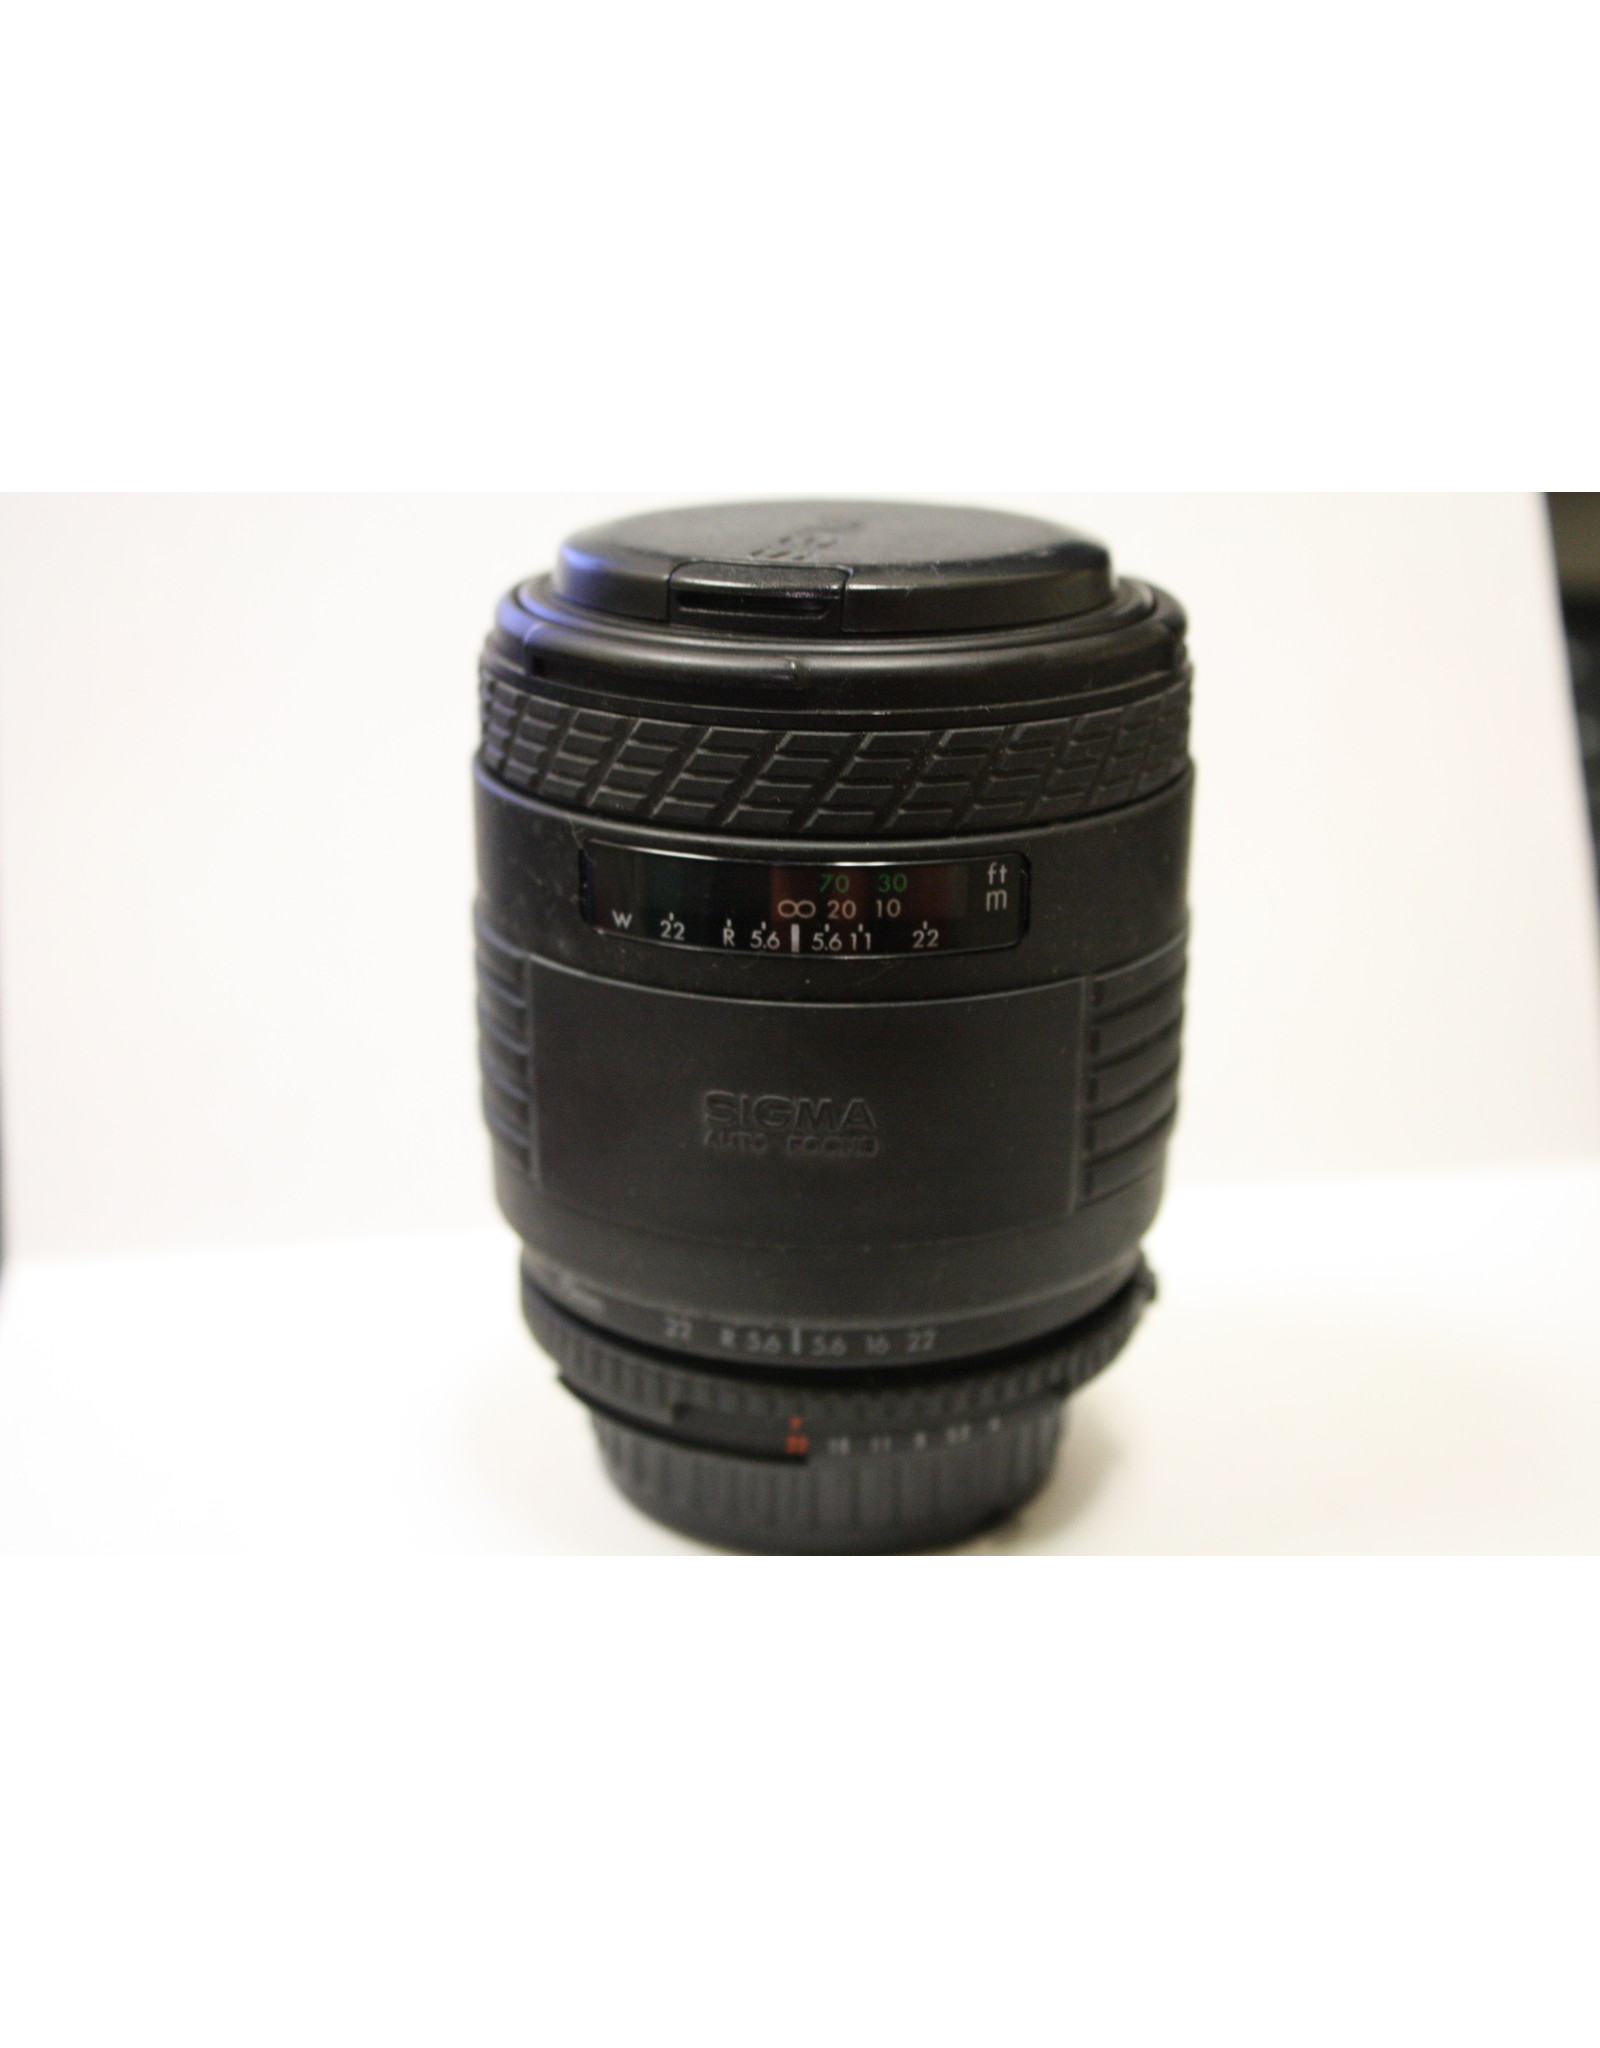 Sigma Sigma UC 70-210mm Zoom f4-5.6 for Pen K (Pre-owned)